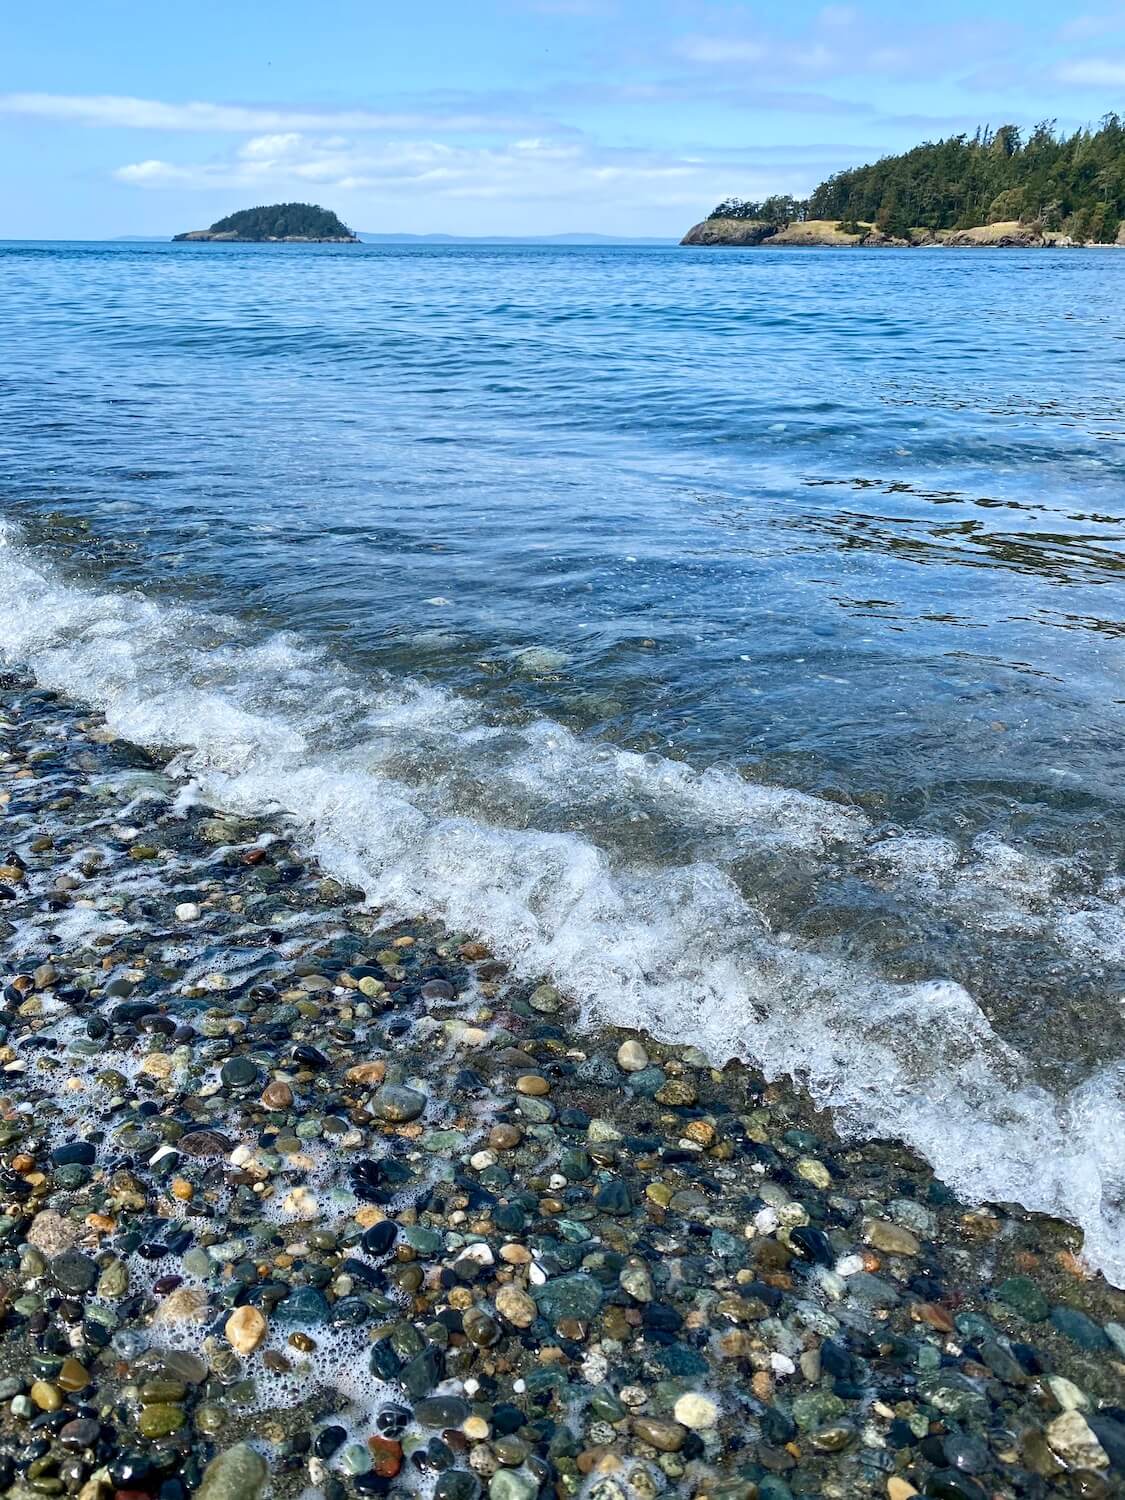 The waves of the Salish Sea at Deception Pass State Park crash down on the pebbles on the beach while rocky fir-tree covered islands are seen in the background. 